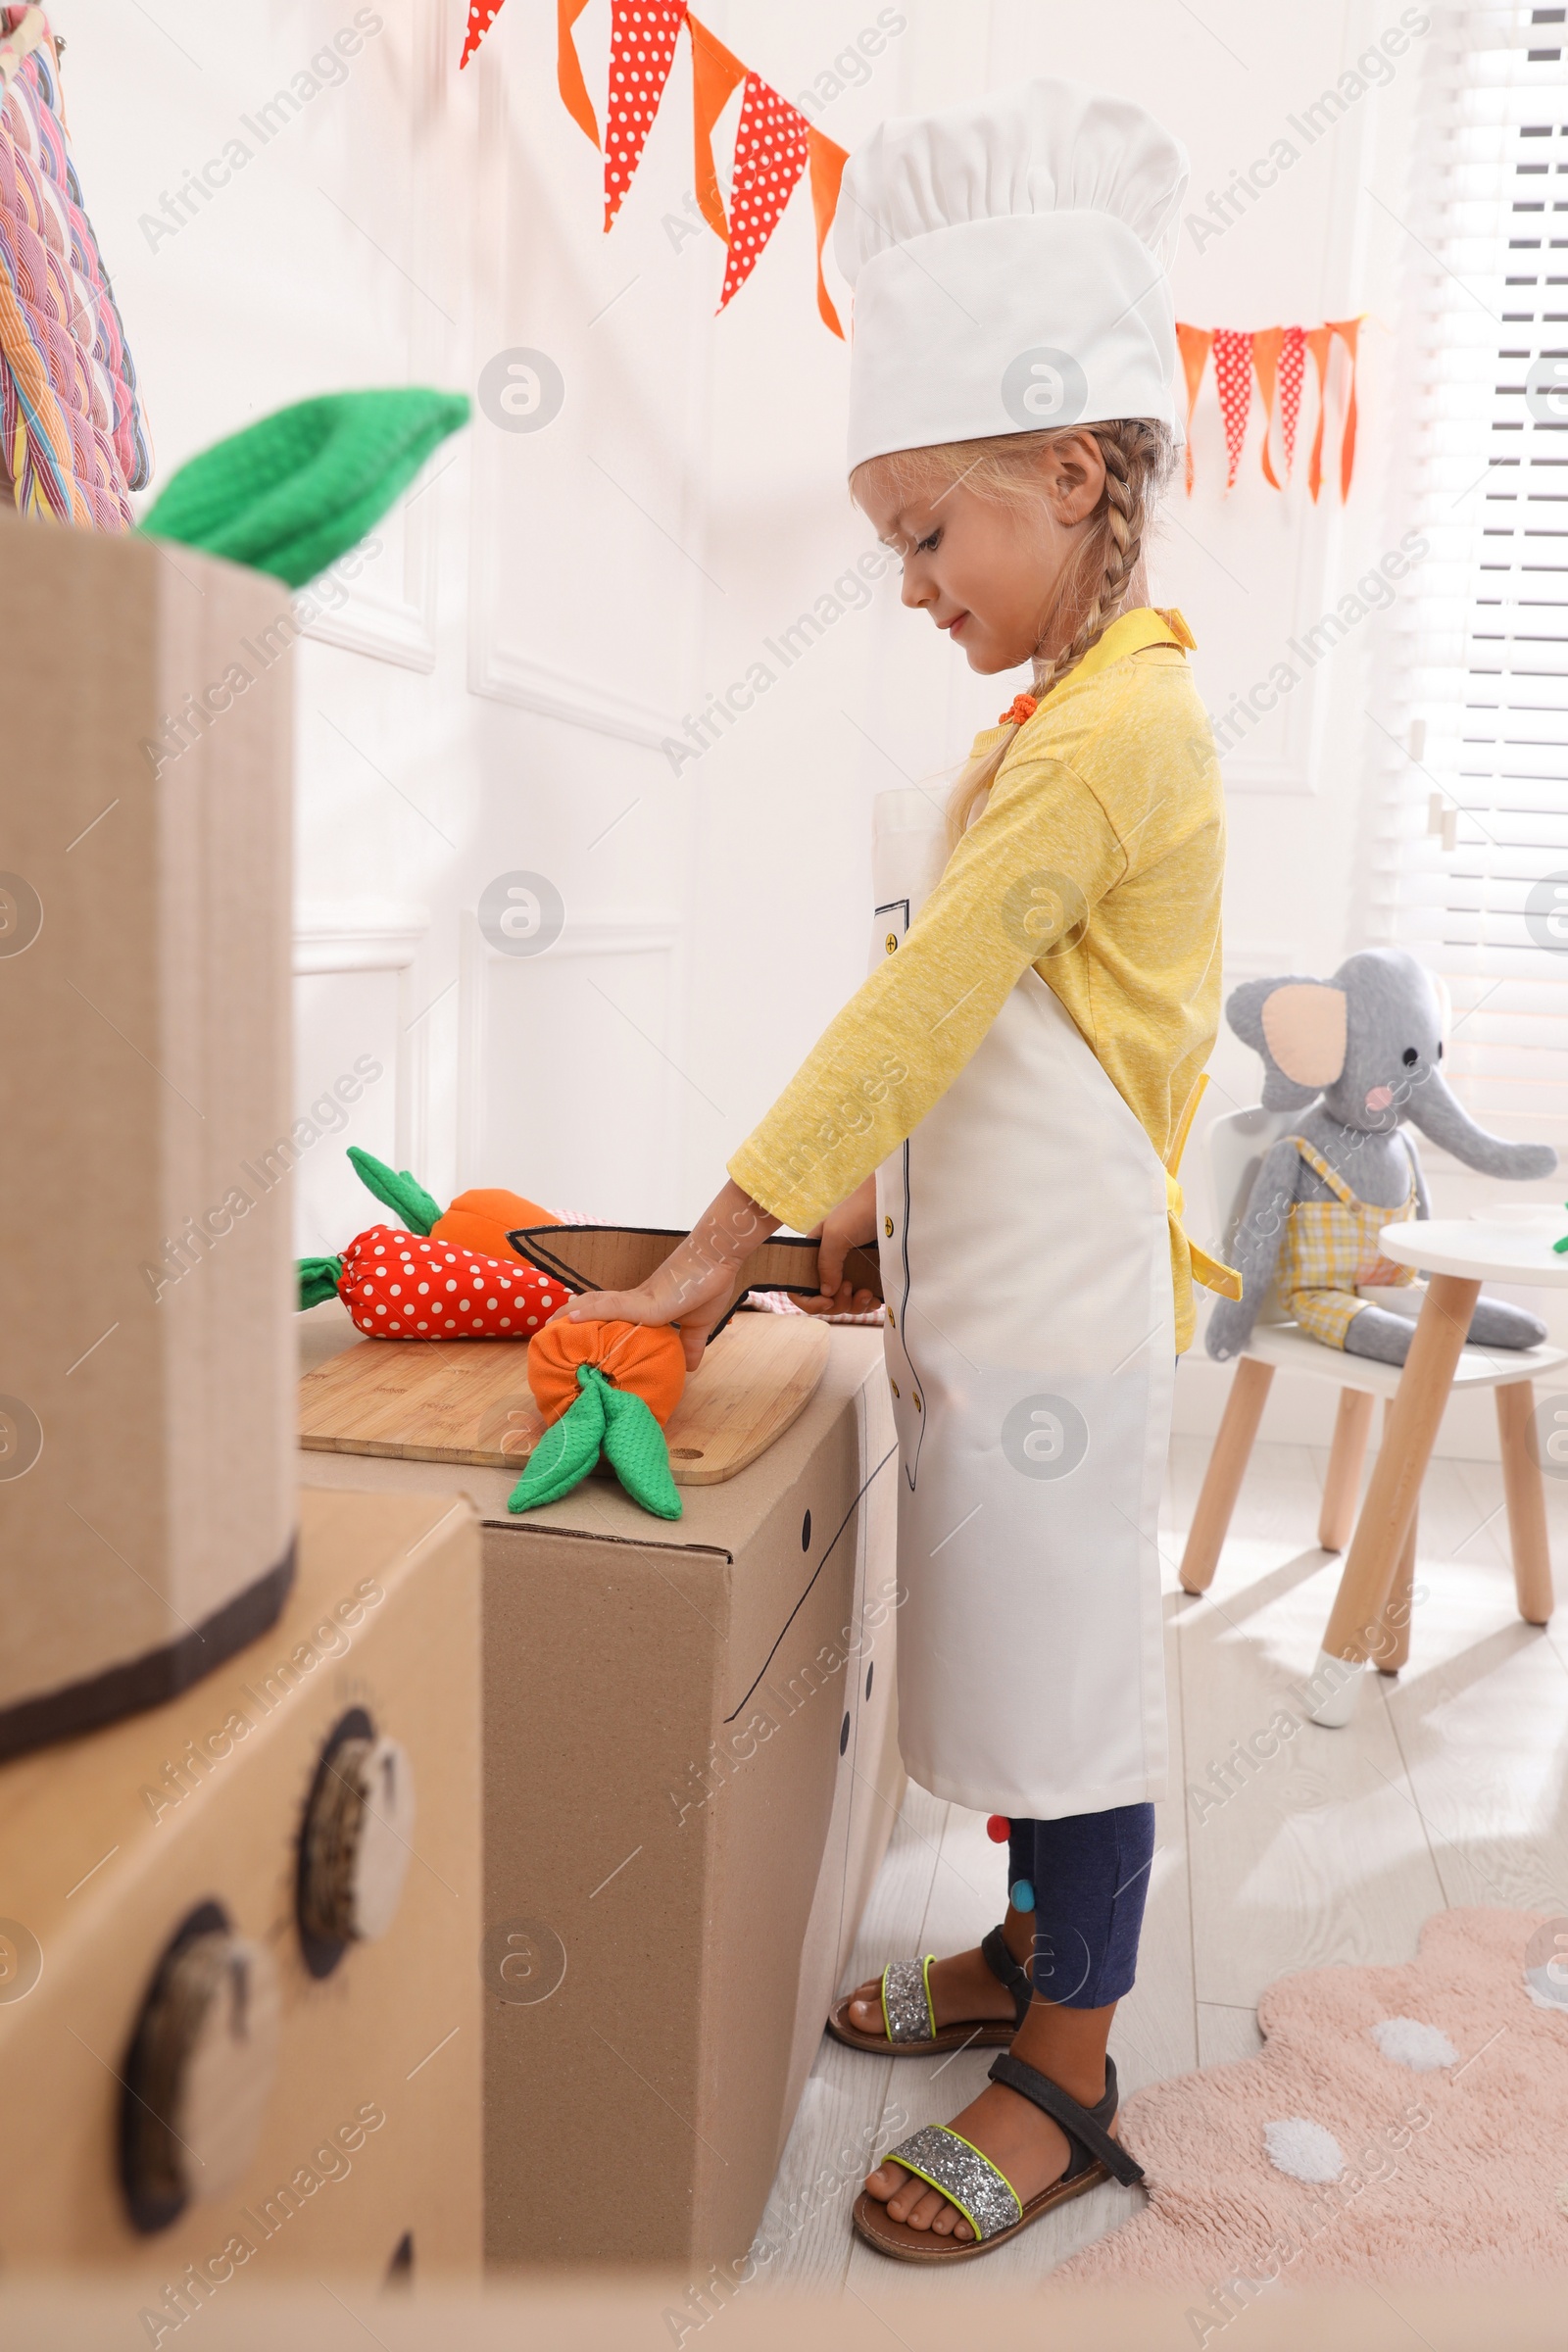 Photo of Little girl playing with toy cardboard kitchen at home